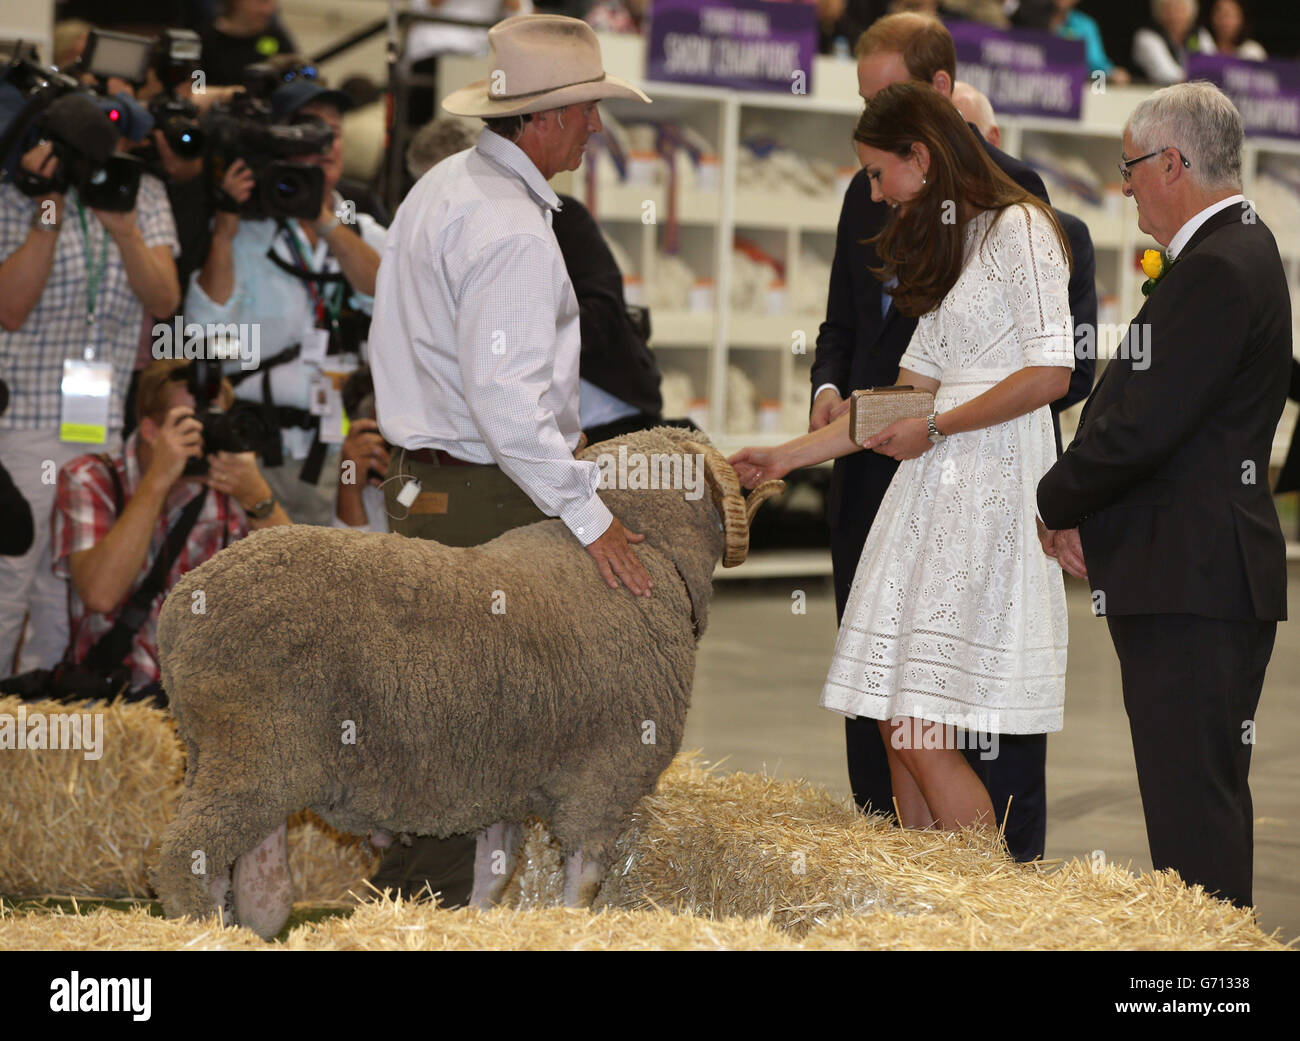 The Duke and Duchess of Cambridge meet a ram as they view agricultural stands at the Royal Easter Show at Sydney Olympic Park during the twelfth day of the Duke and Duchess of Cambridge's official tour to New Zealand and Australia. Stock Photo